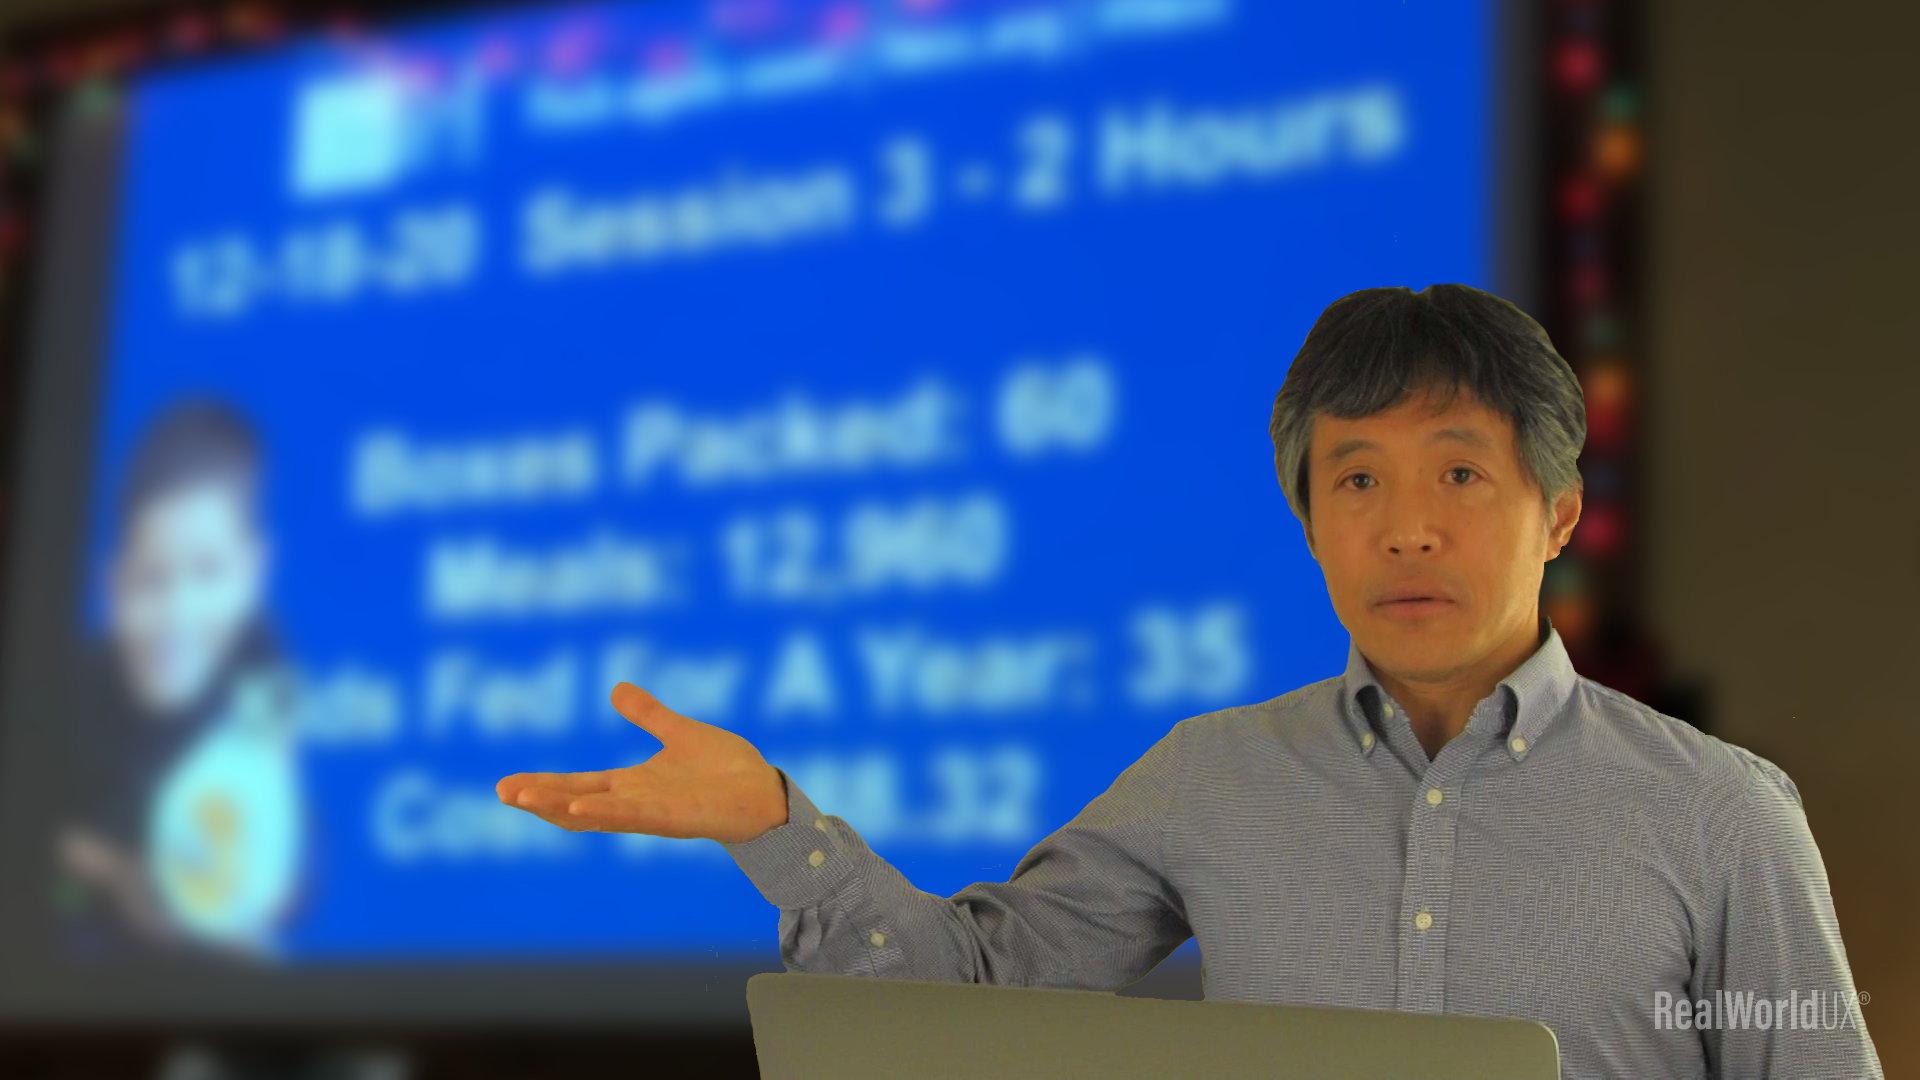 Author in front of a blurred image of a volunteer session result presentation screen